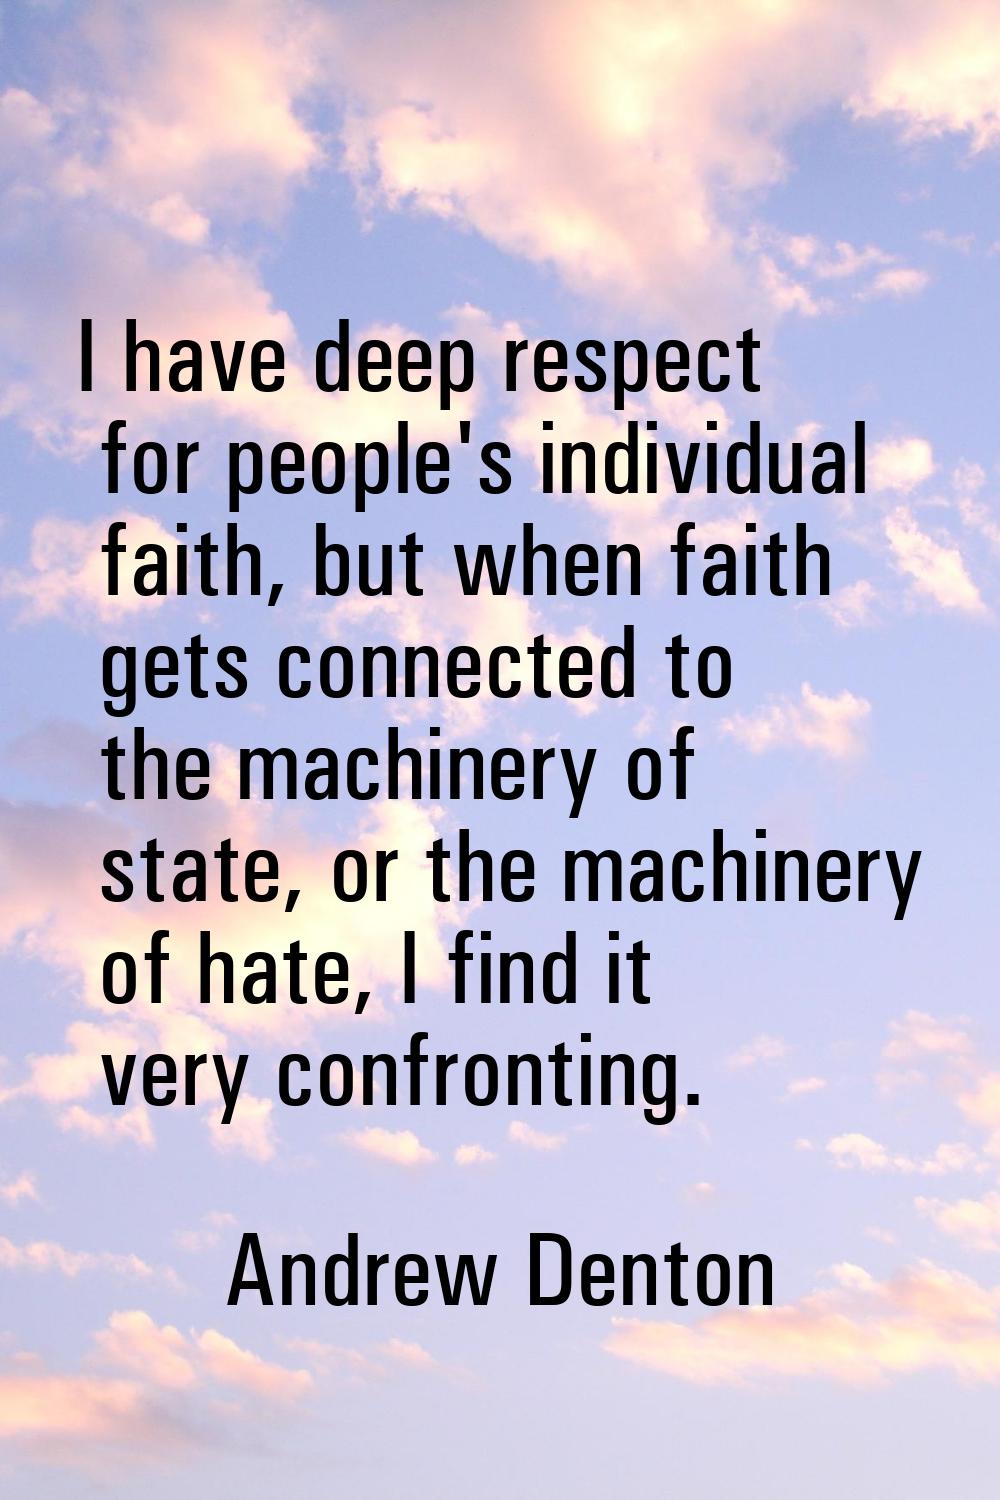 I have deep respect for people's individual faith, but when faith gets connected to the machinery o